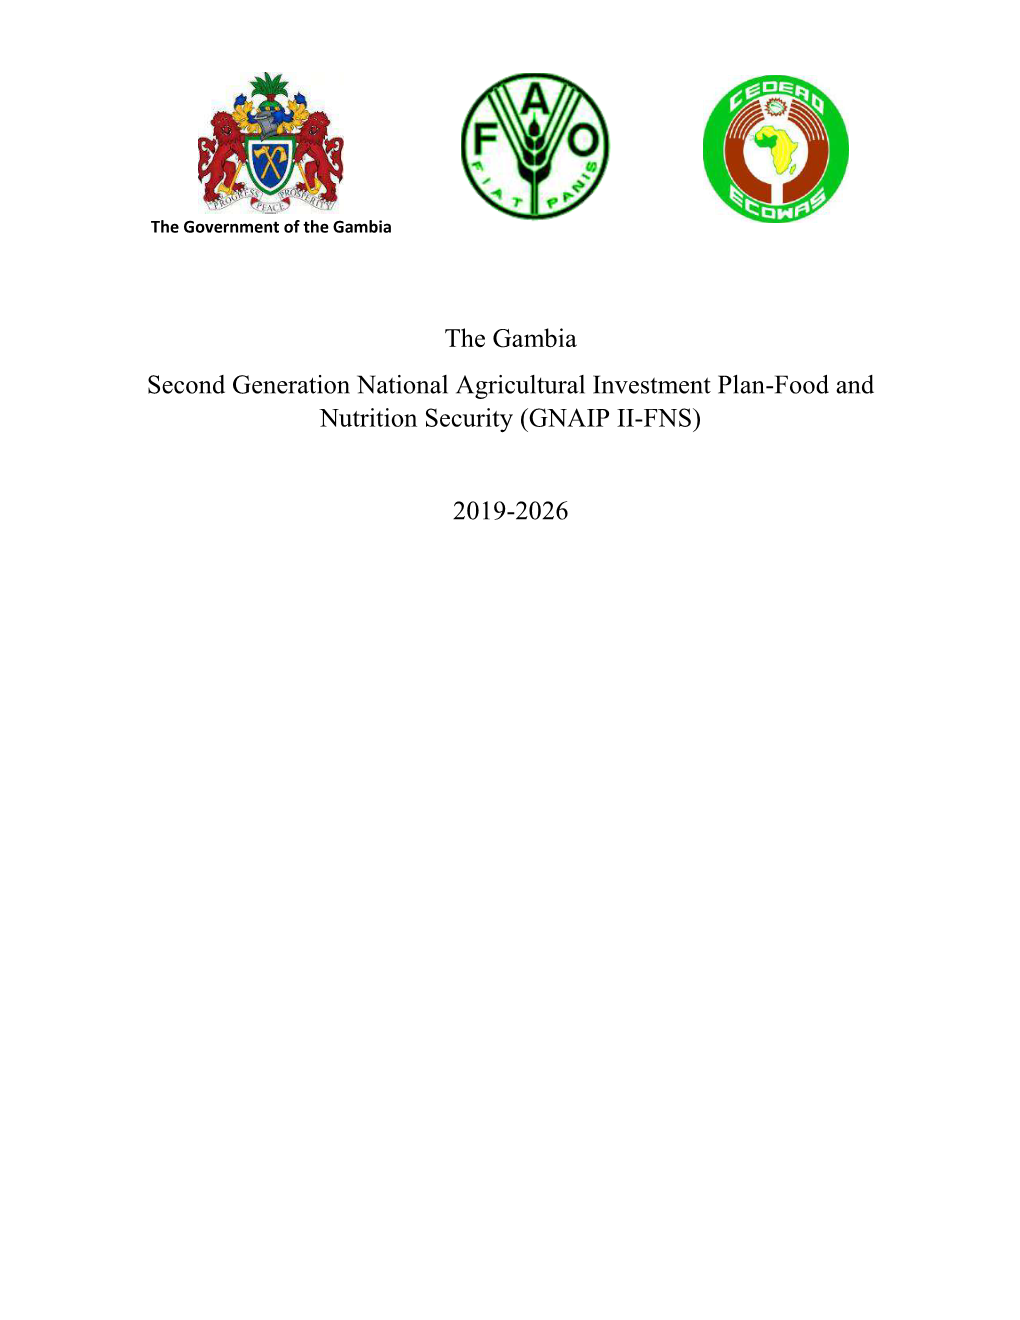 The Gambia Second Generation National Agricultural Investment Plan-Food and Nutrition Security (GNAIP II-FNS)